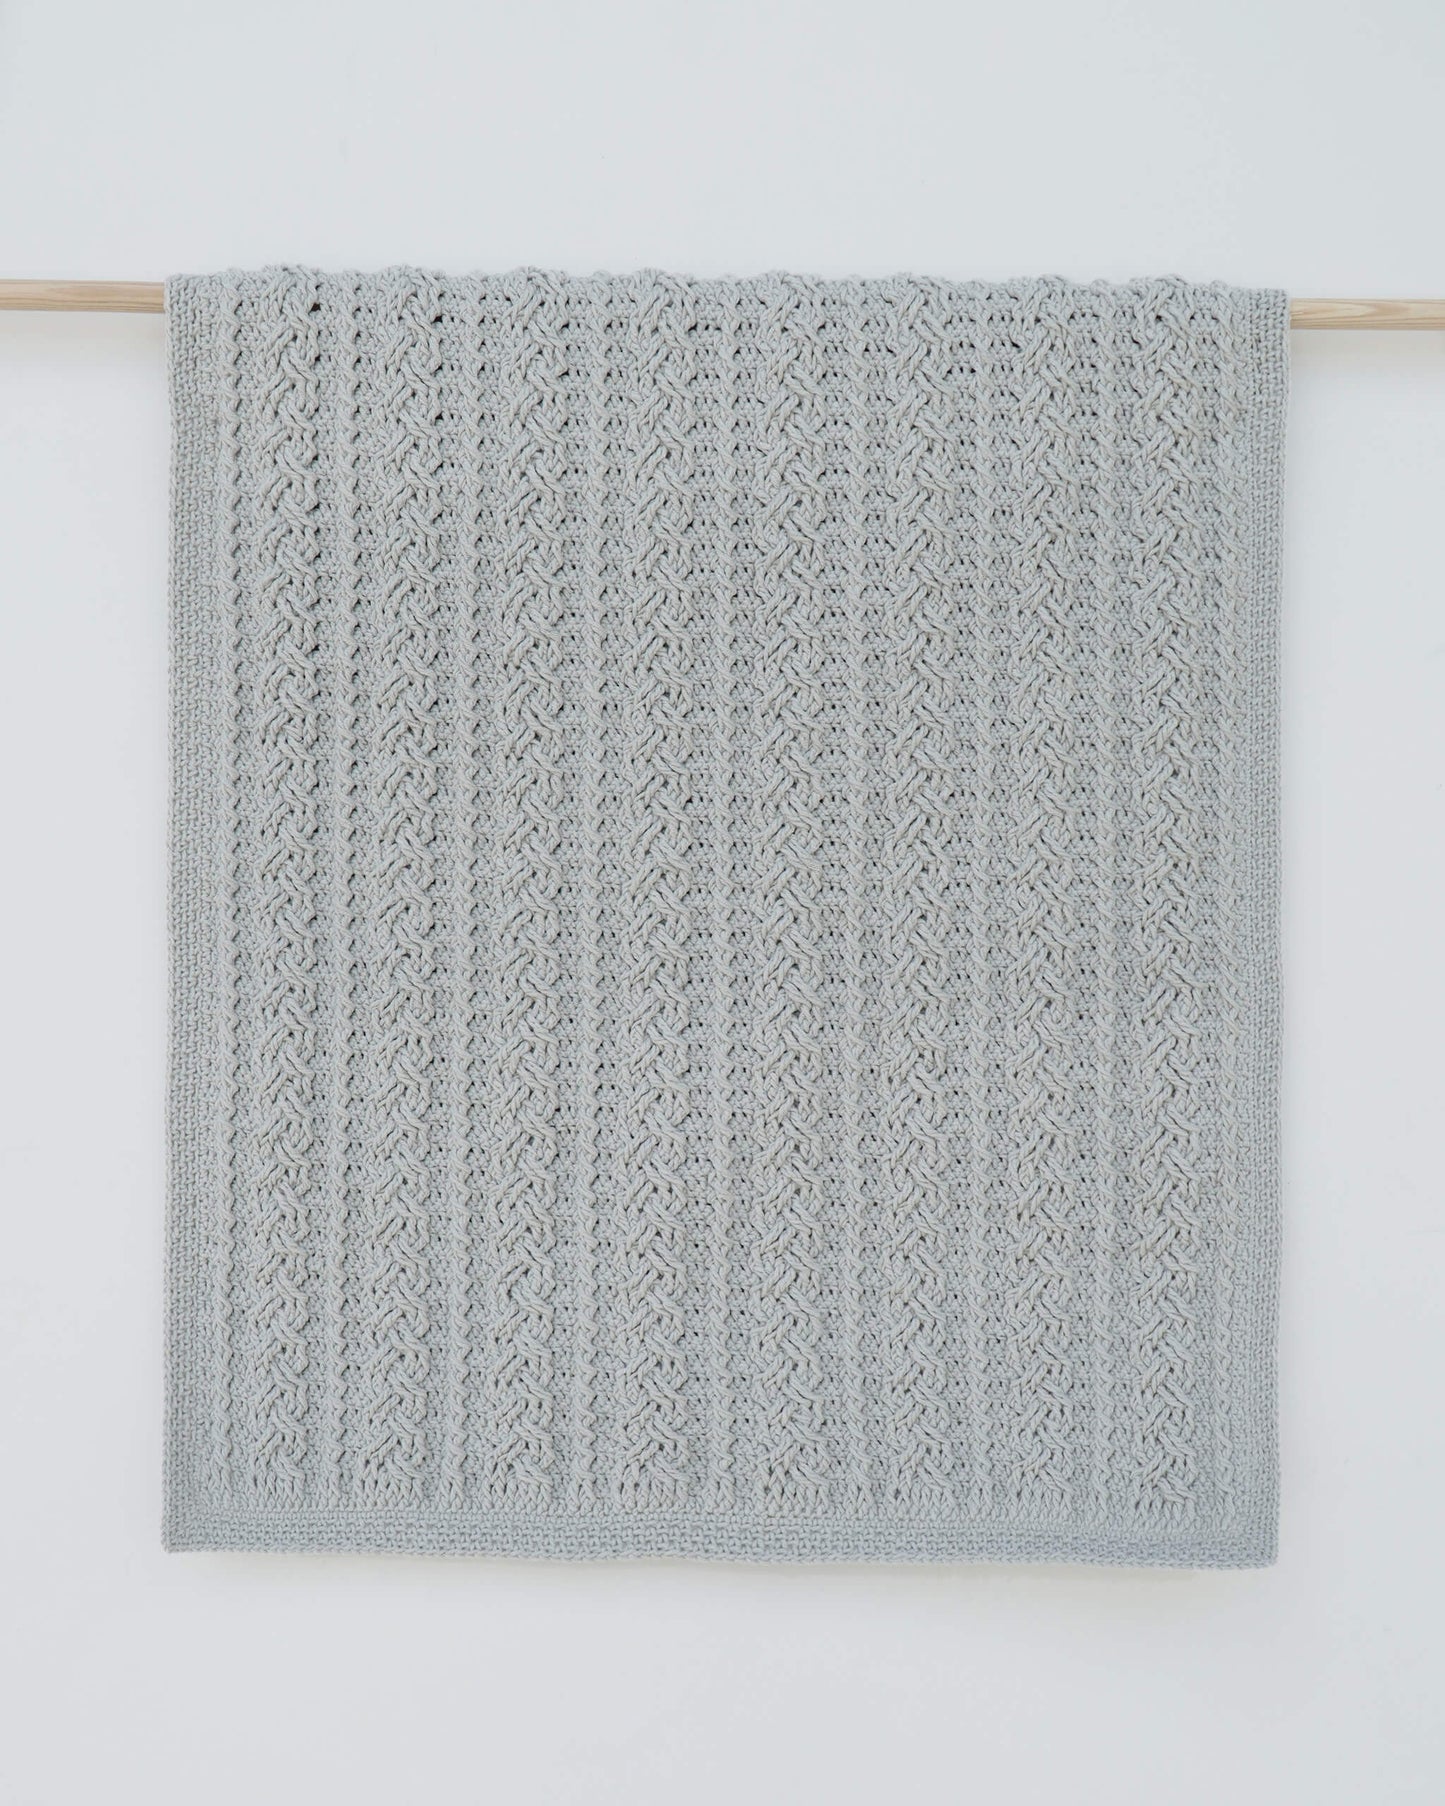 Cable blanket pattern | Video tutorial